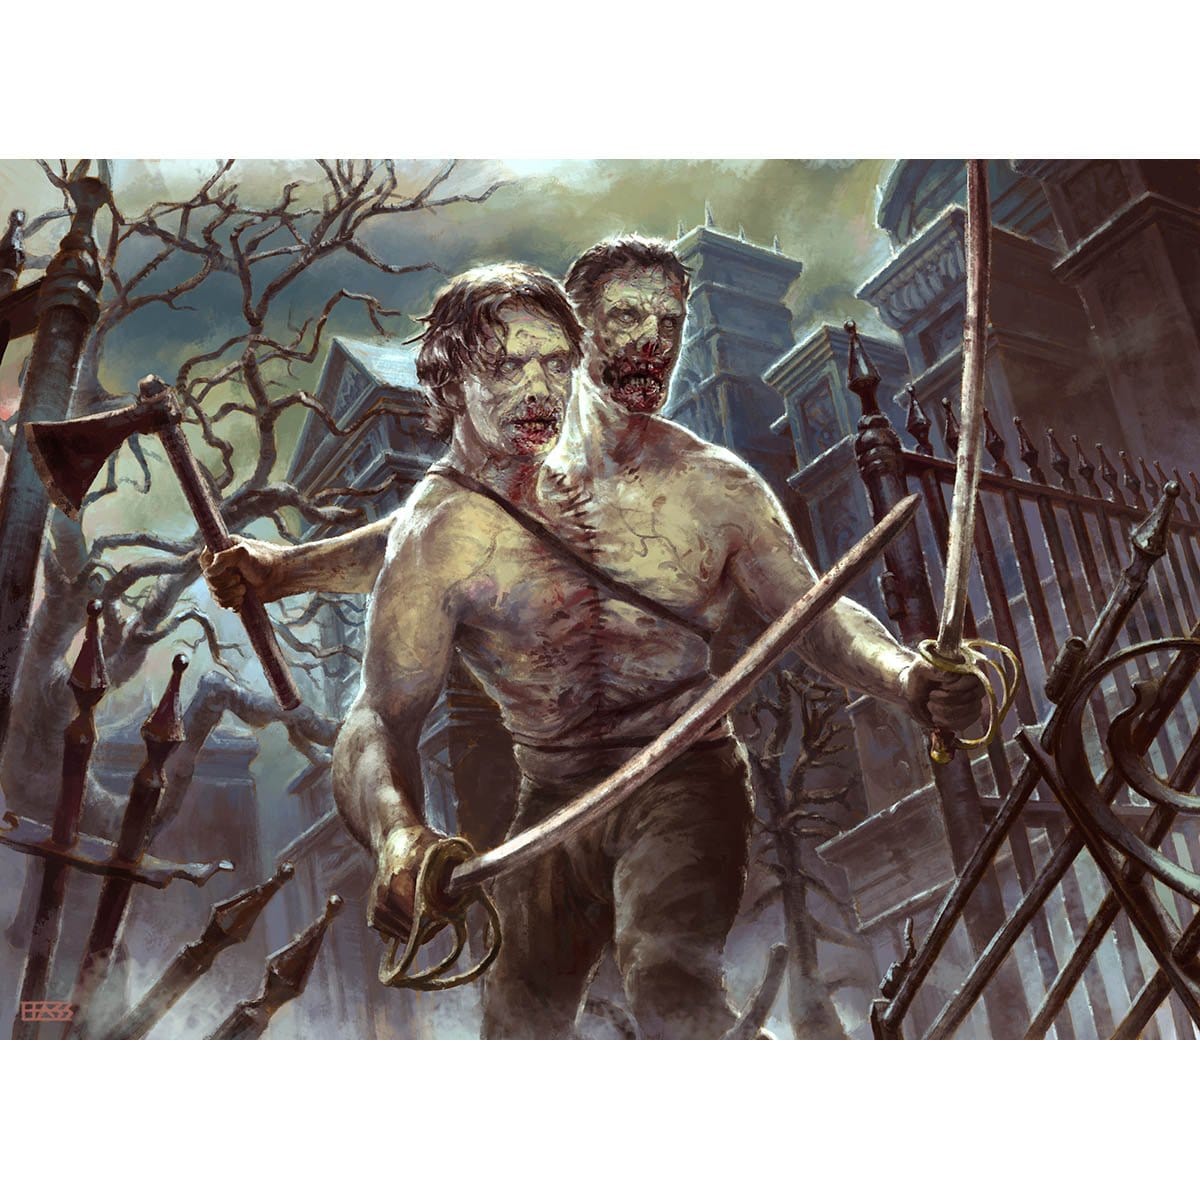 Two-Headed Zombie Print - Print - Original Magic Art - Accessories for Magic the Gathering and other card games